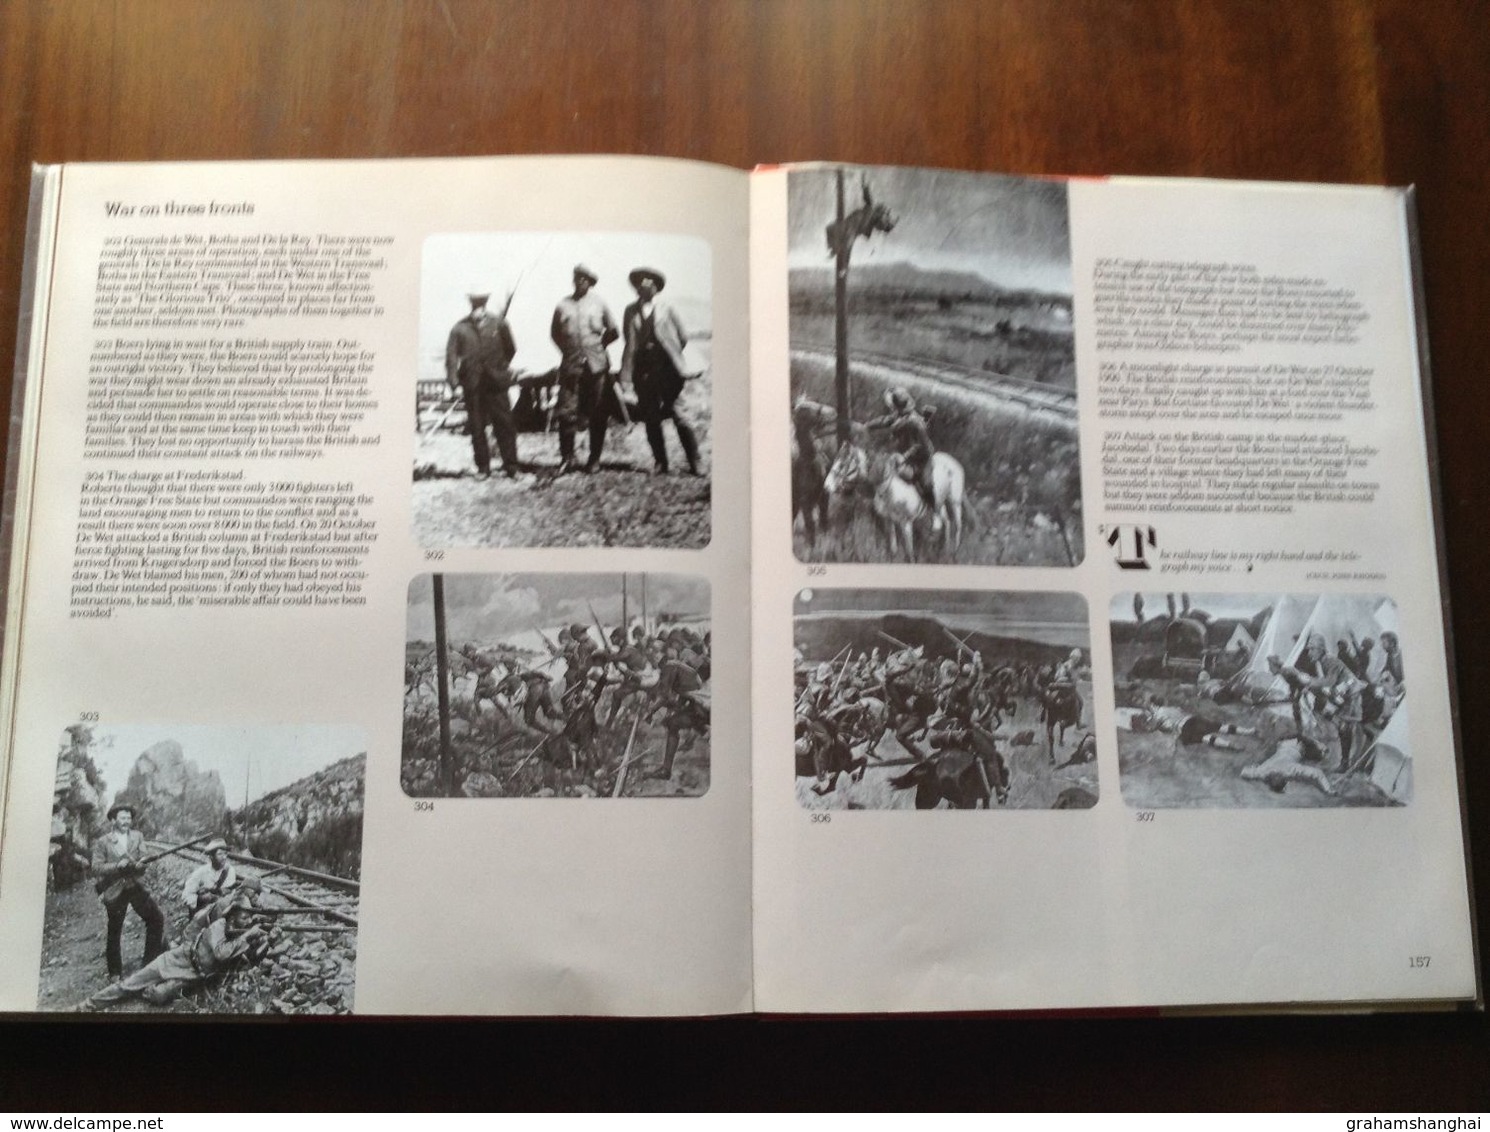 Anglo Boer war 1899-1902 a pictorial history war in South Africa illustrated photo book